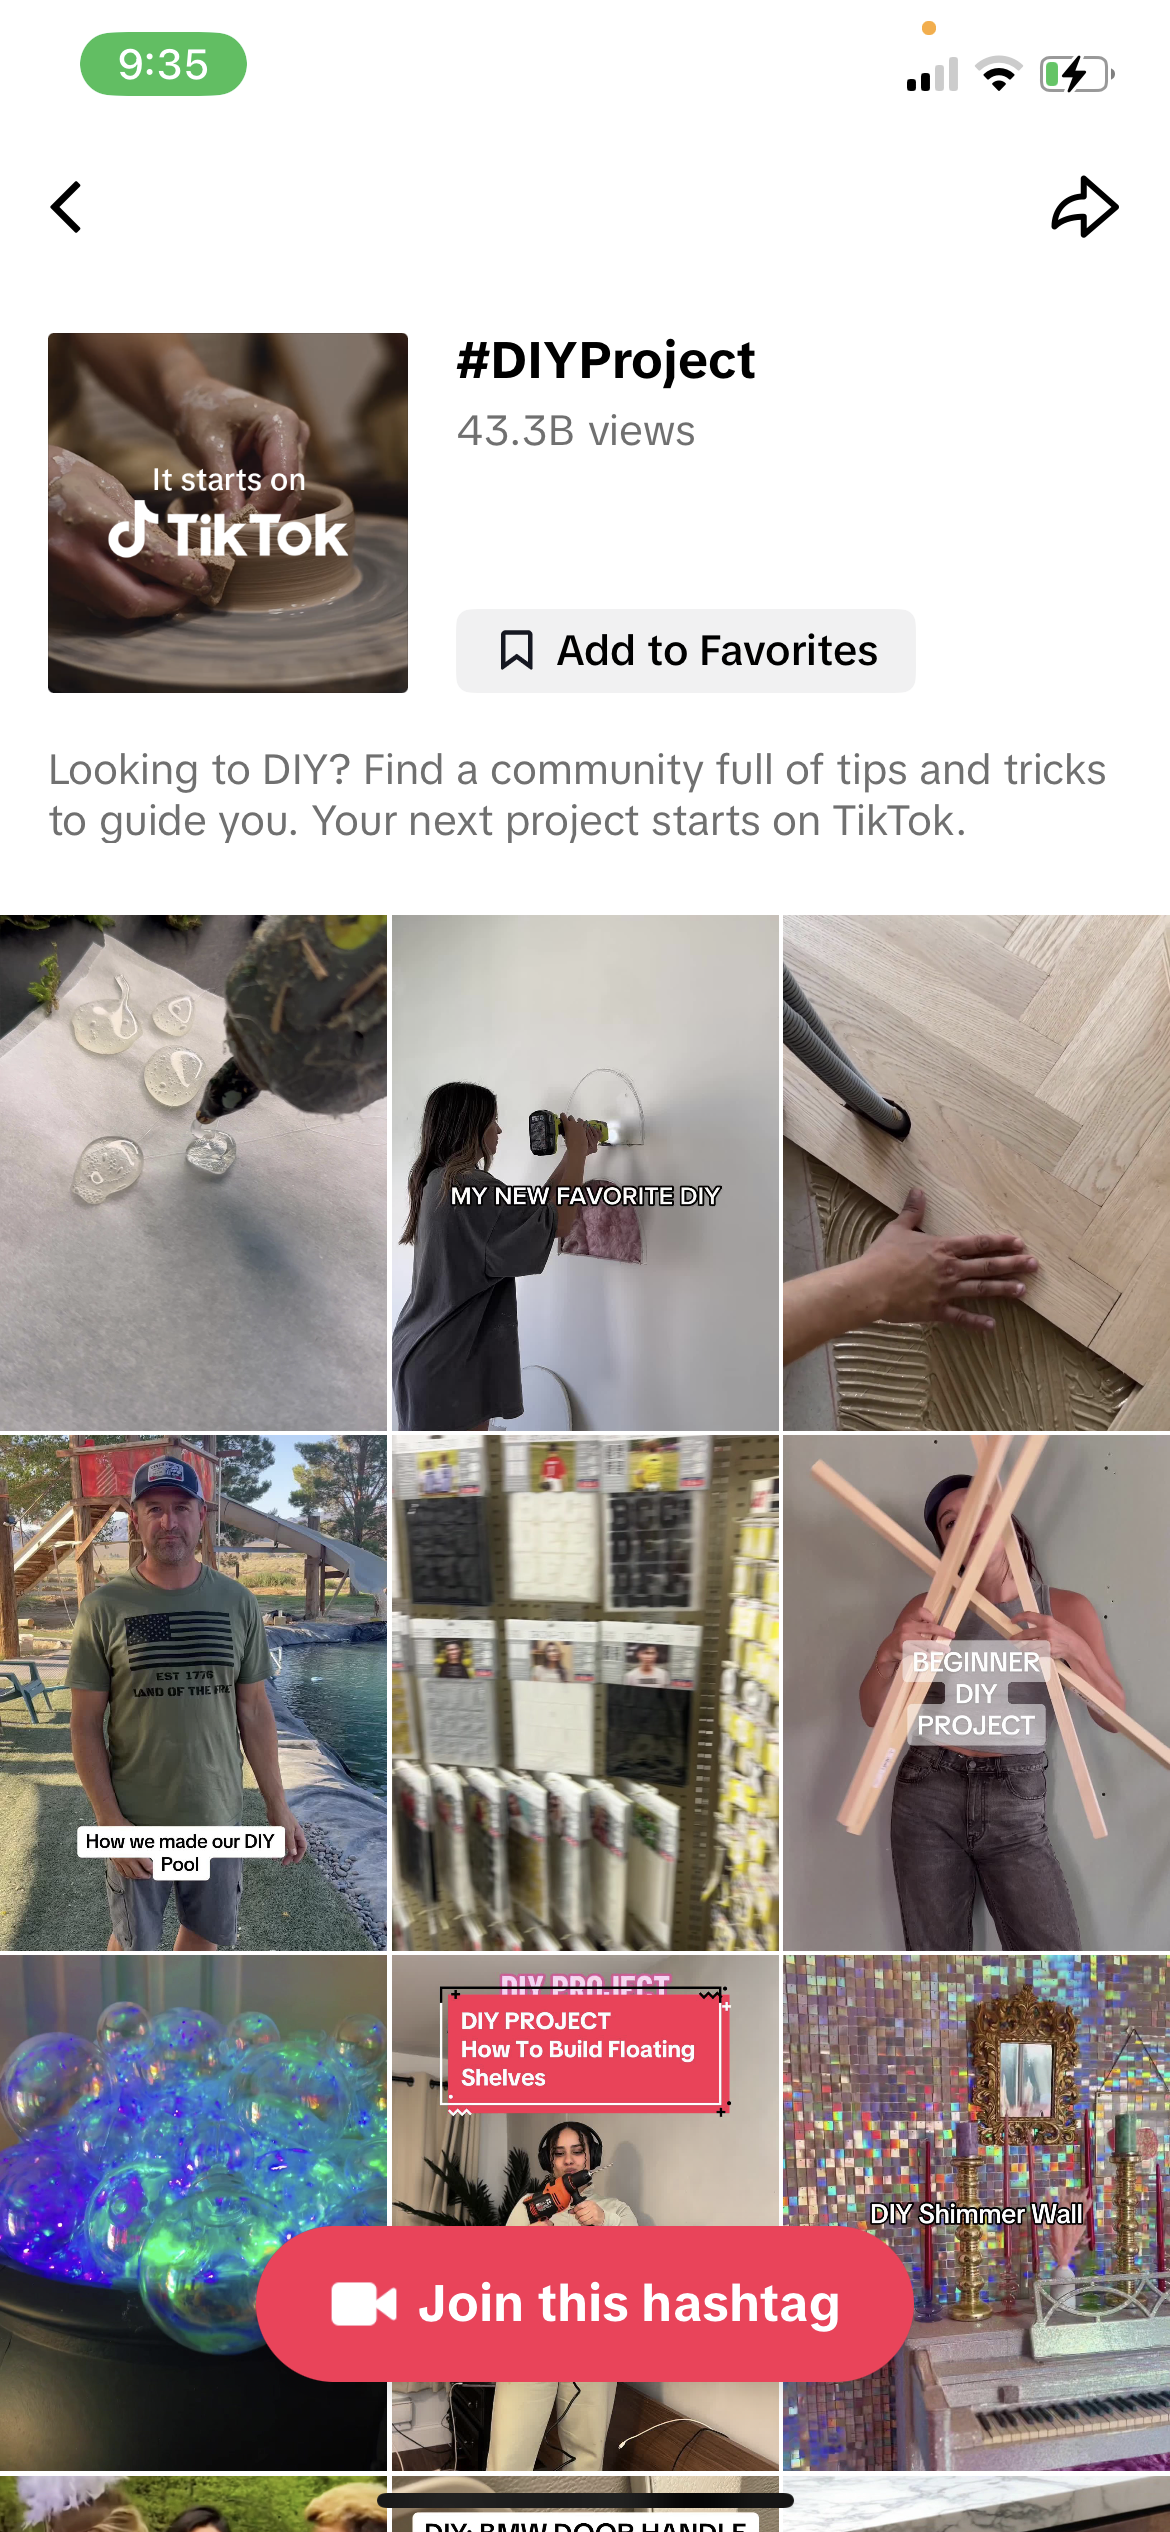 A screenshot of the #diyproject hashtag results in TikTok